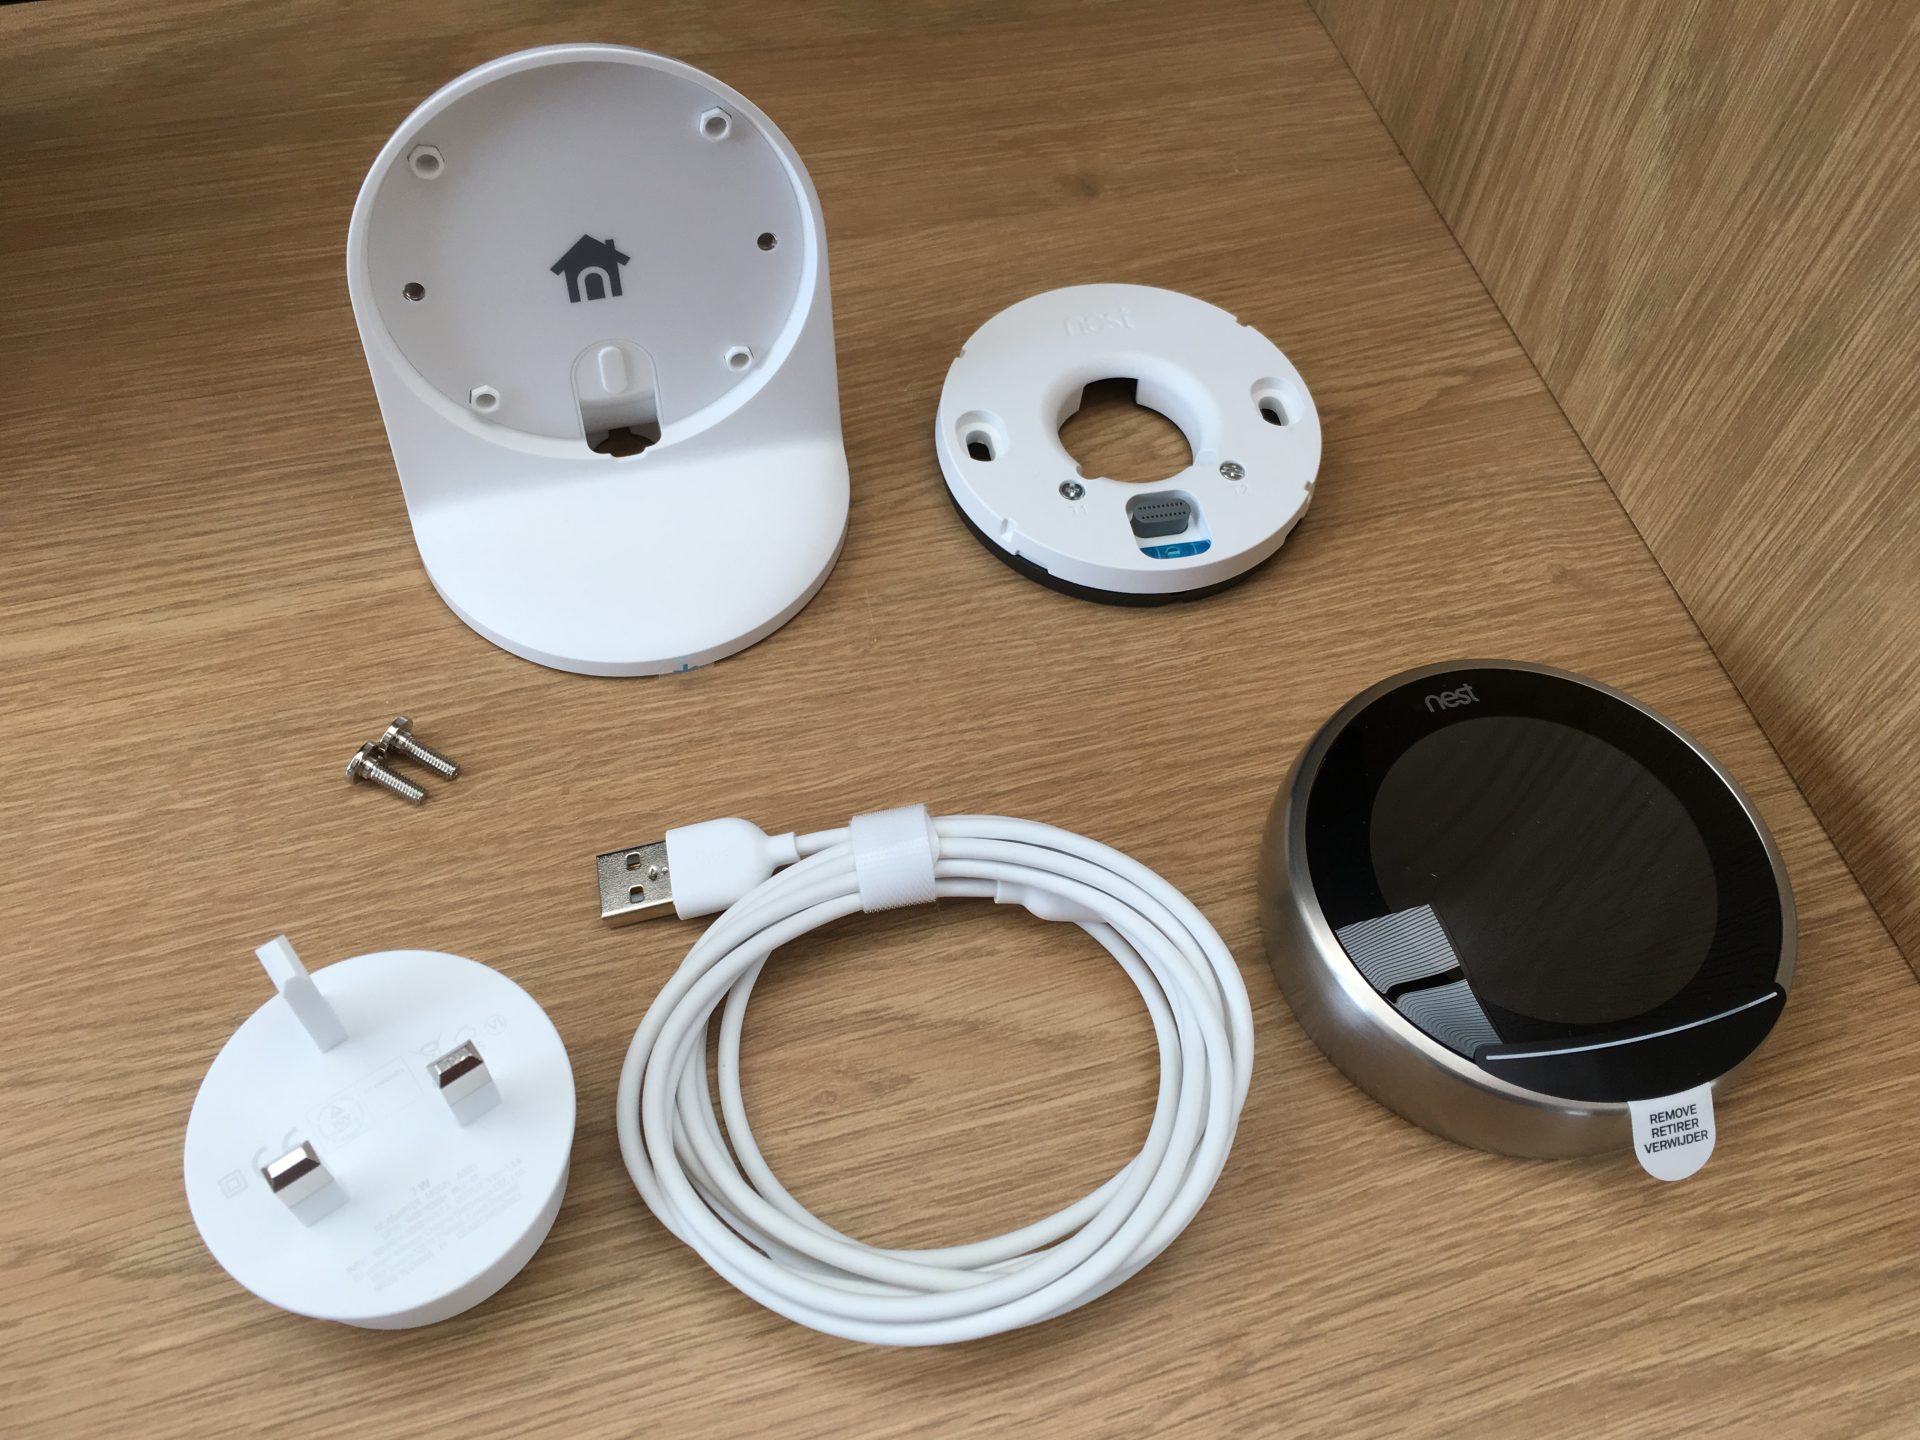 Nest stand components